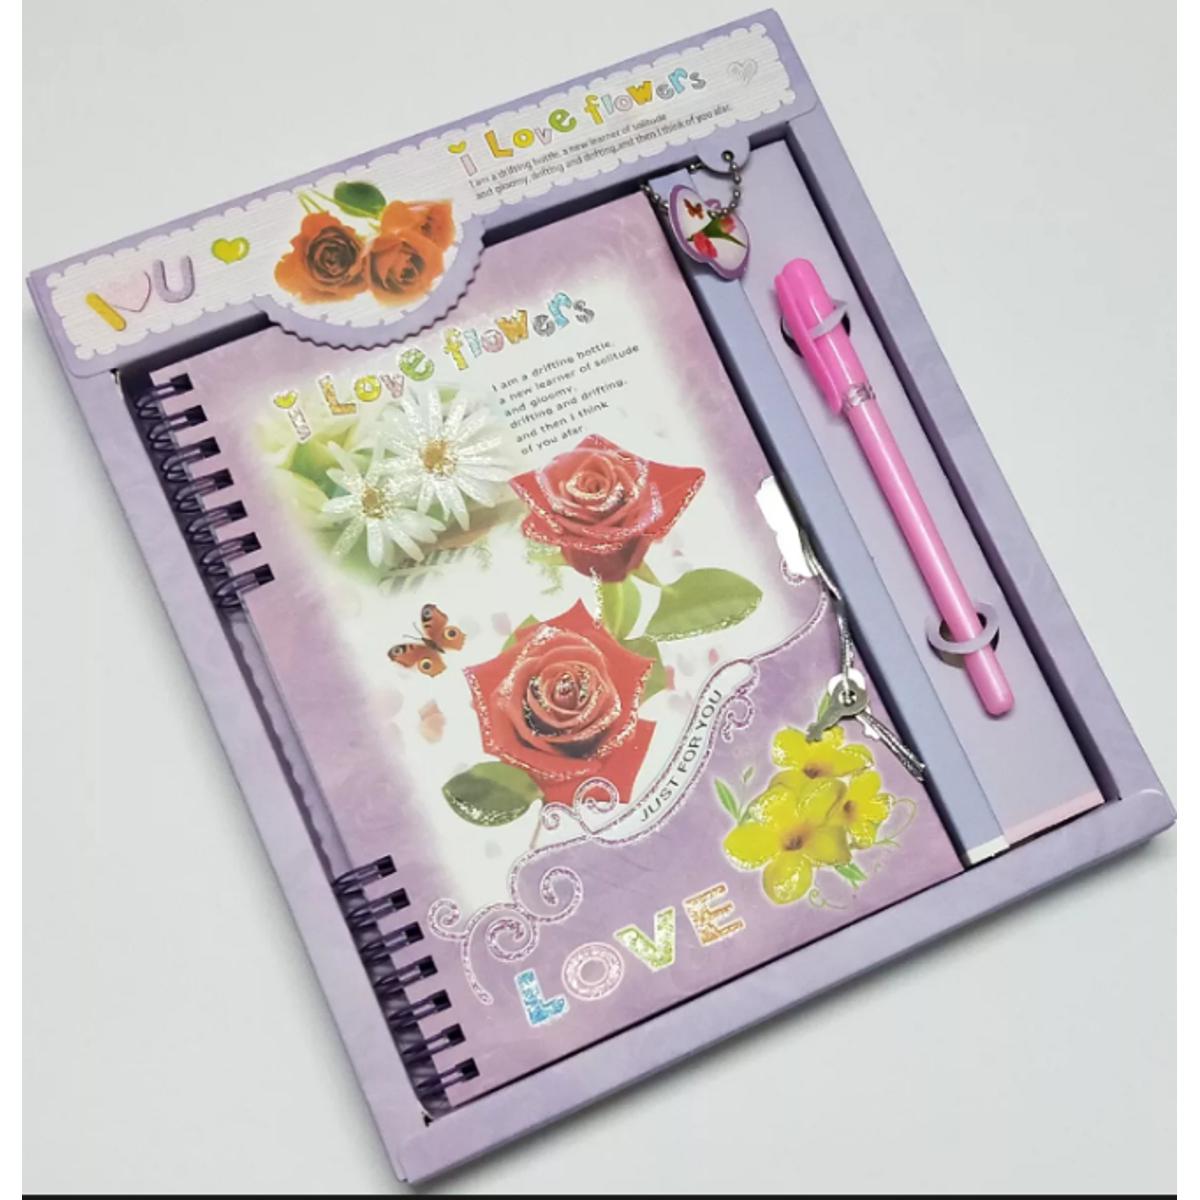 New Year Gift of Calender and Diary Book @ Best Price | Giftacrossindia